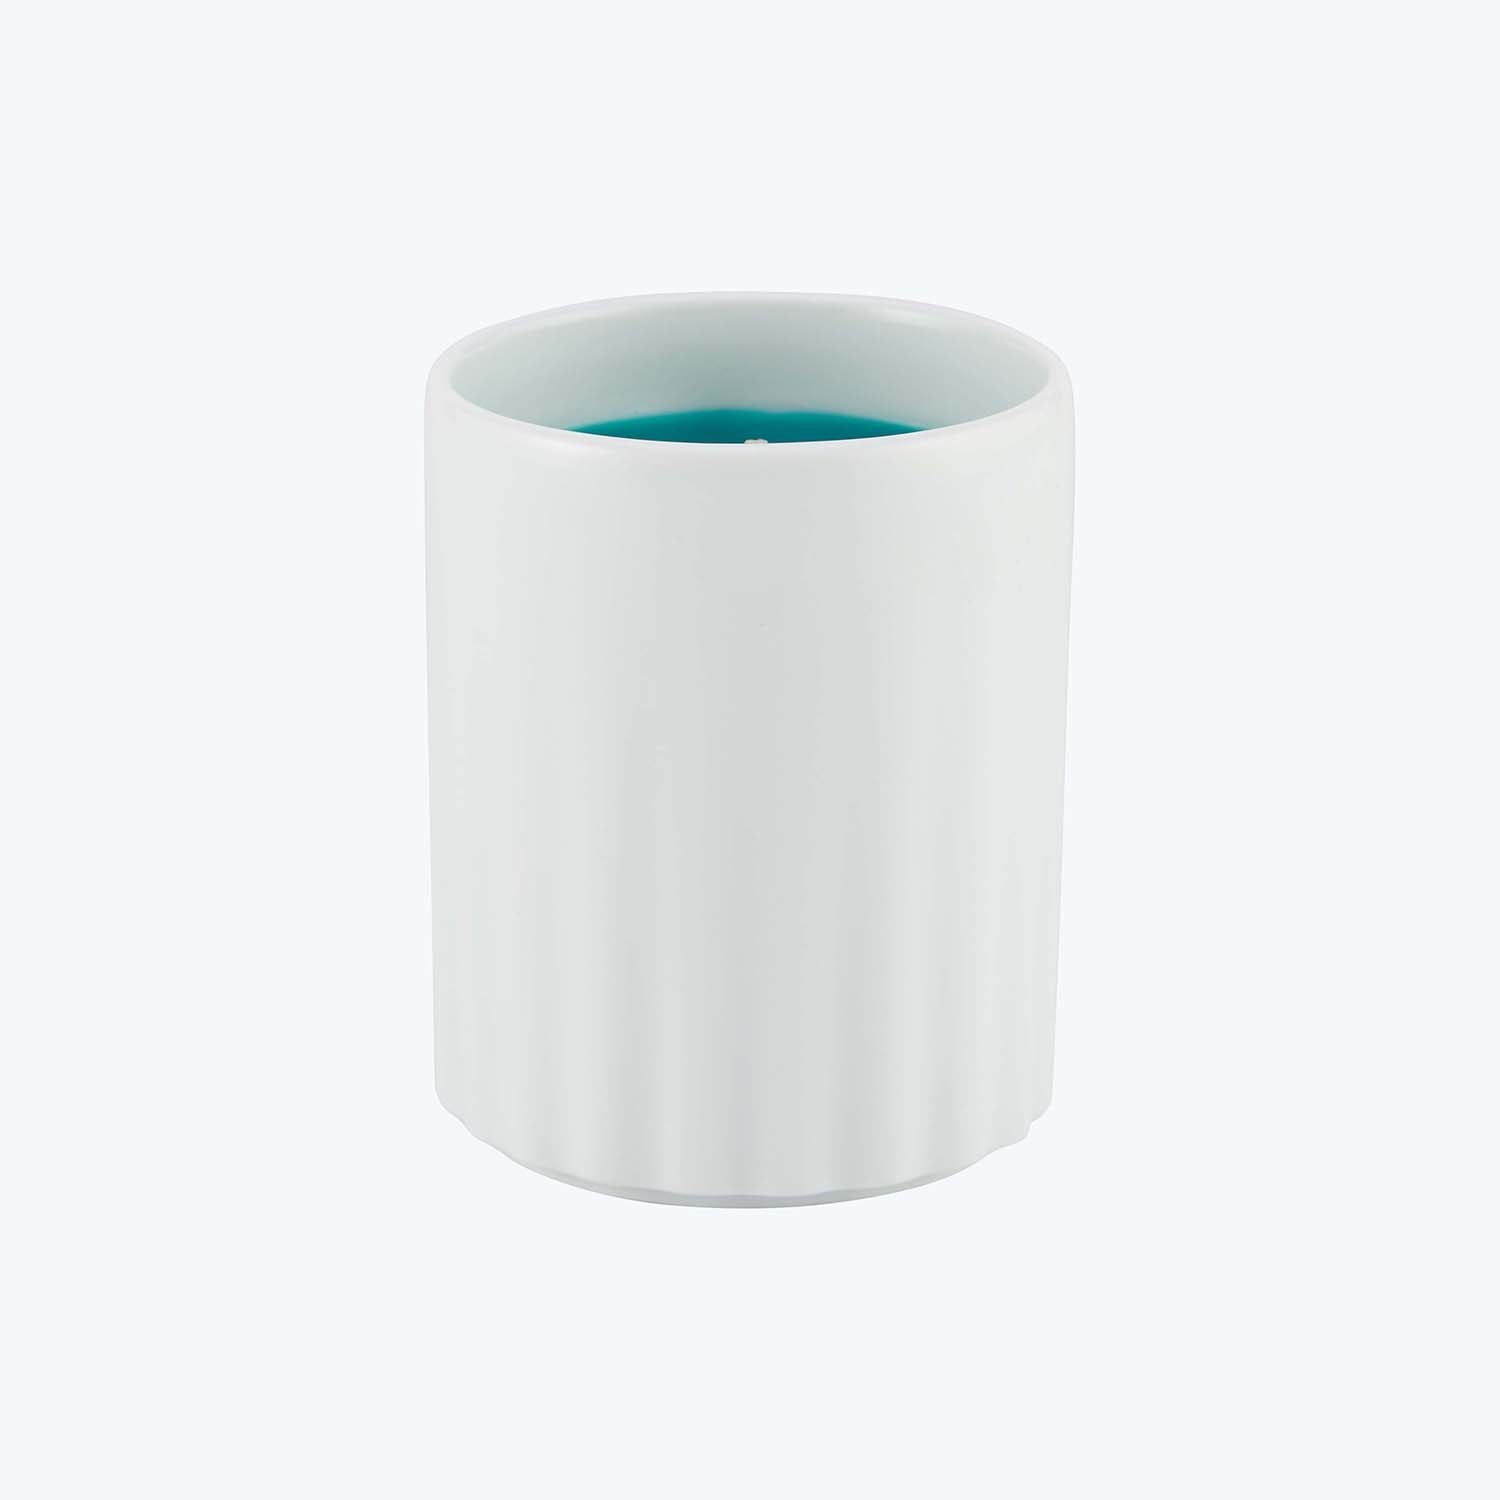 Smooth white candle with teal wax partially visible at top.